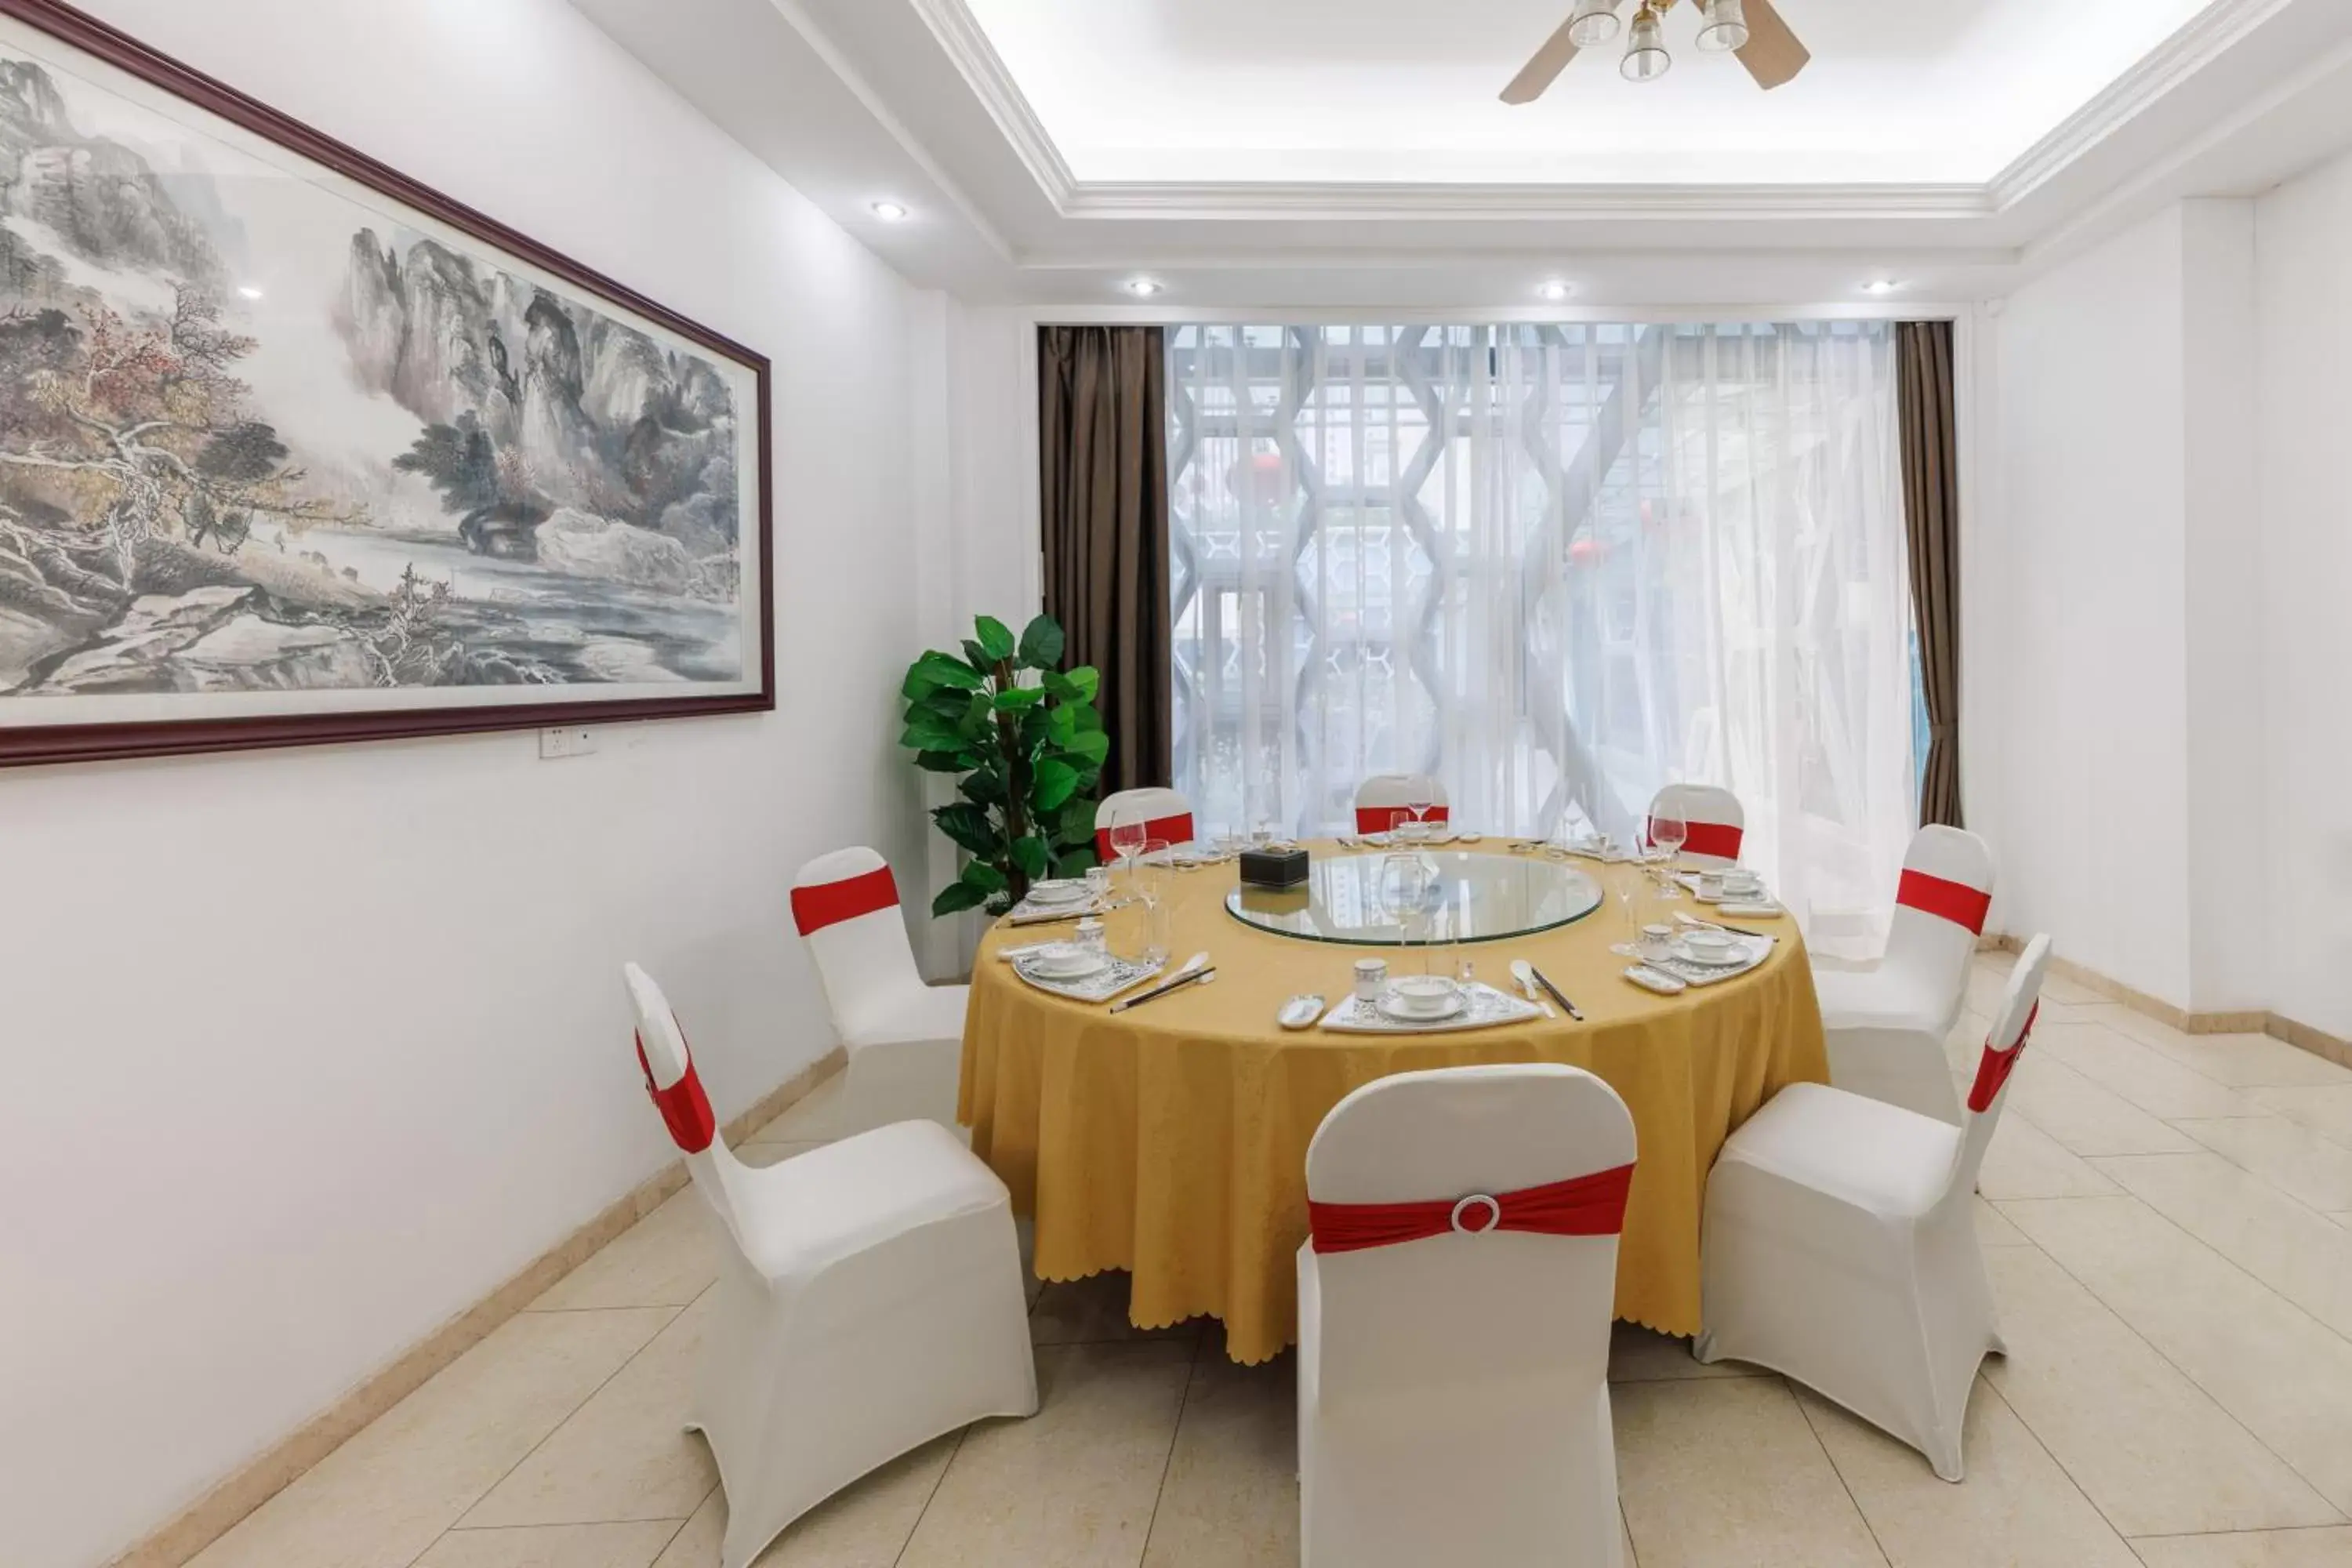 Dining area, Banquet Facilities in Sunflower Hotel & Residence, Shenzhen